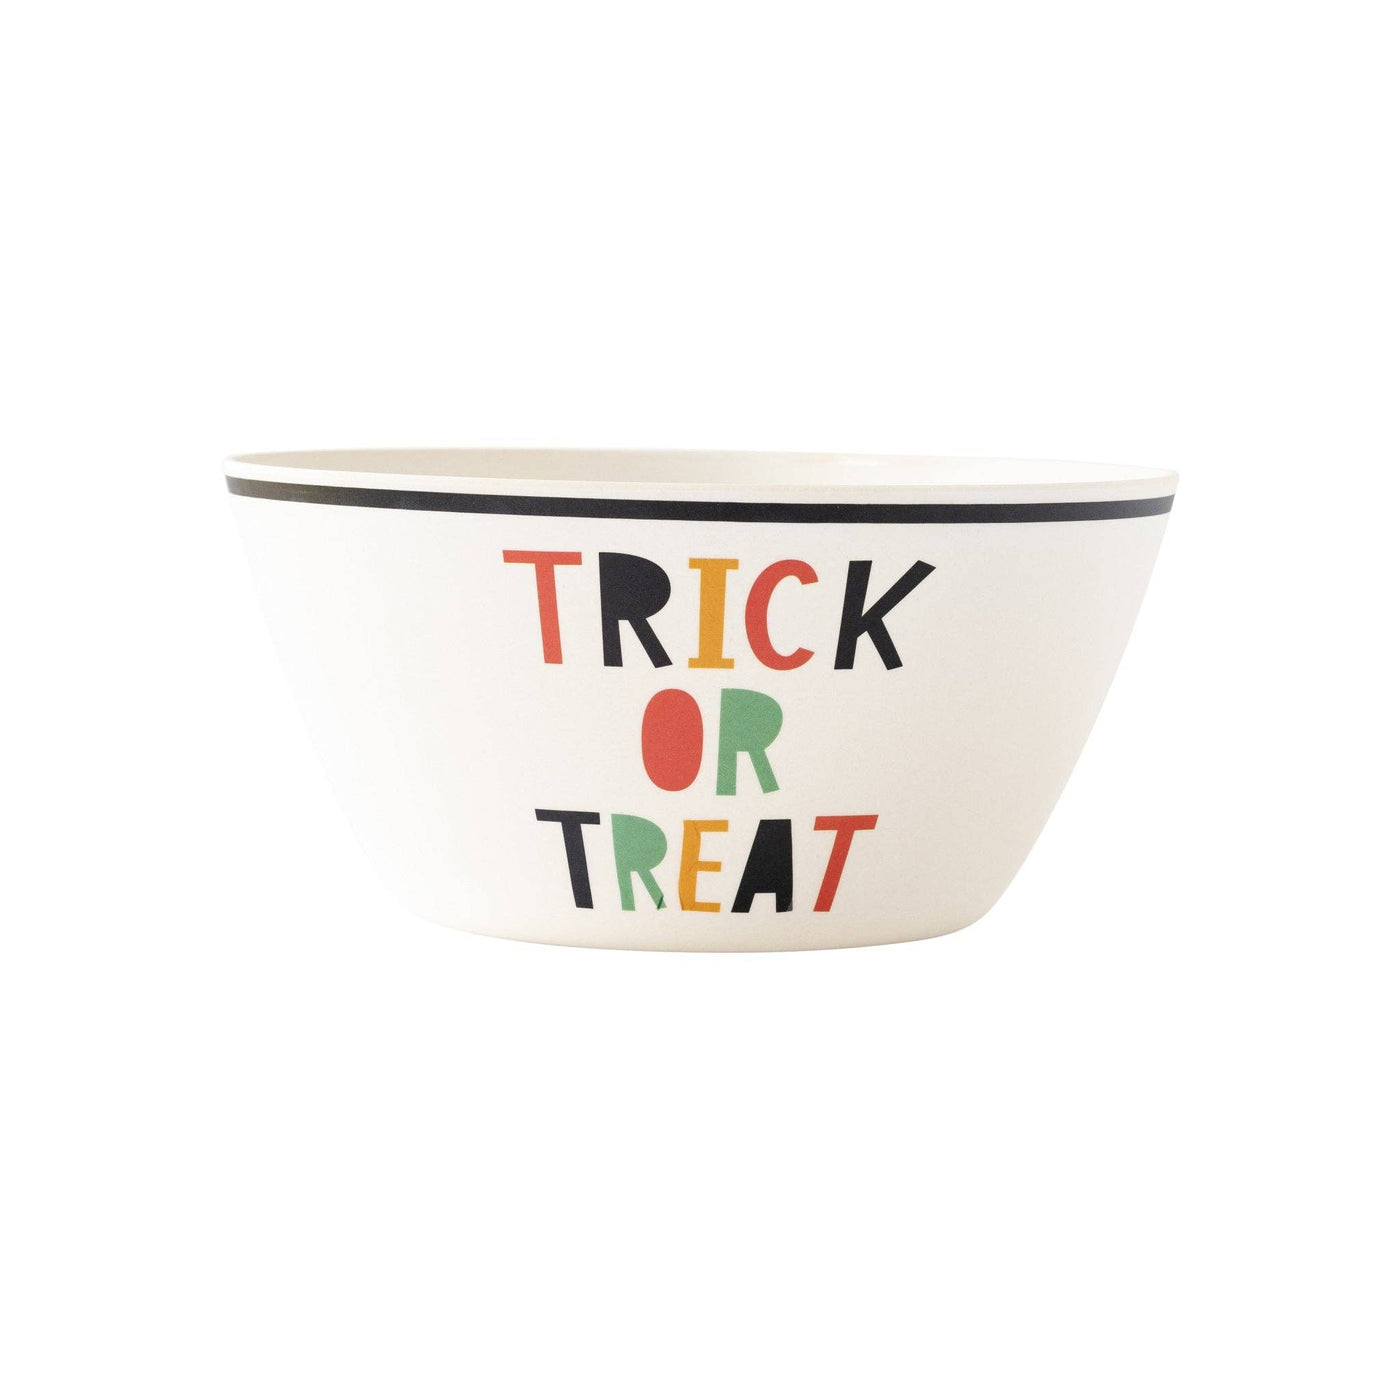 My Mind’s Eye - PREORDER SHIPPING 8/1-8/8 - PLBB122 -  Trick or Treat Reusable Bamboo Bowl